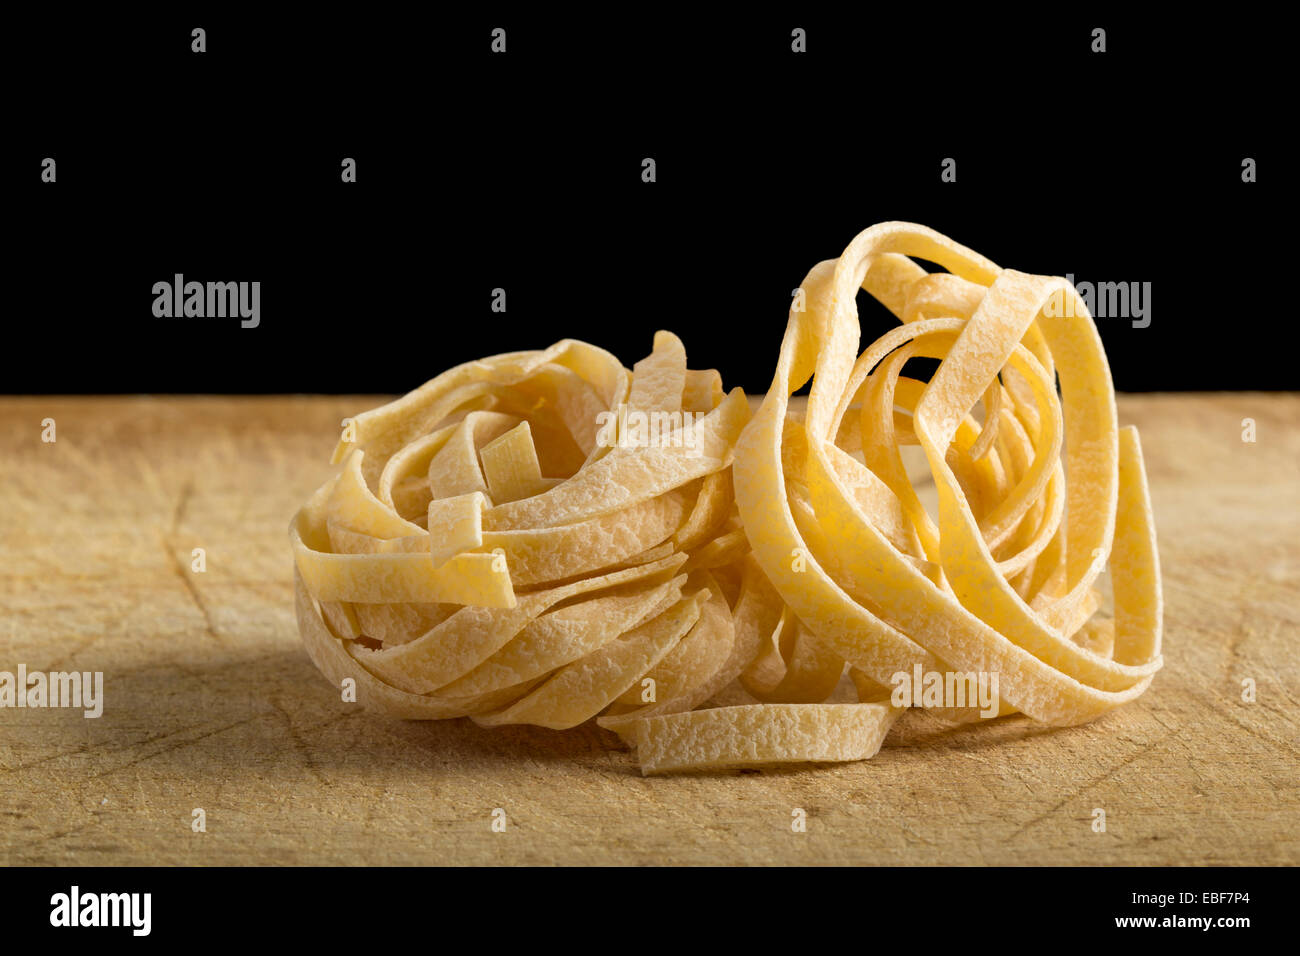 Homemade tagliatelle on the wooden table with black background Stock Photo